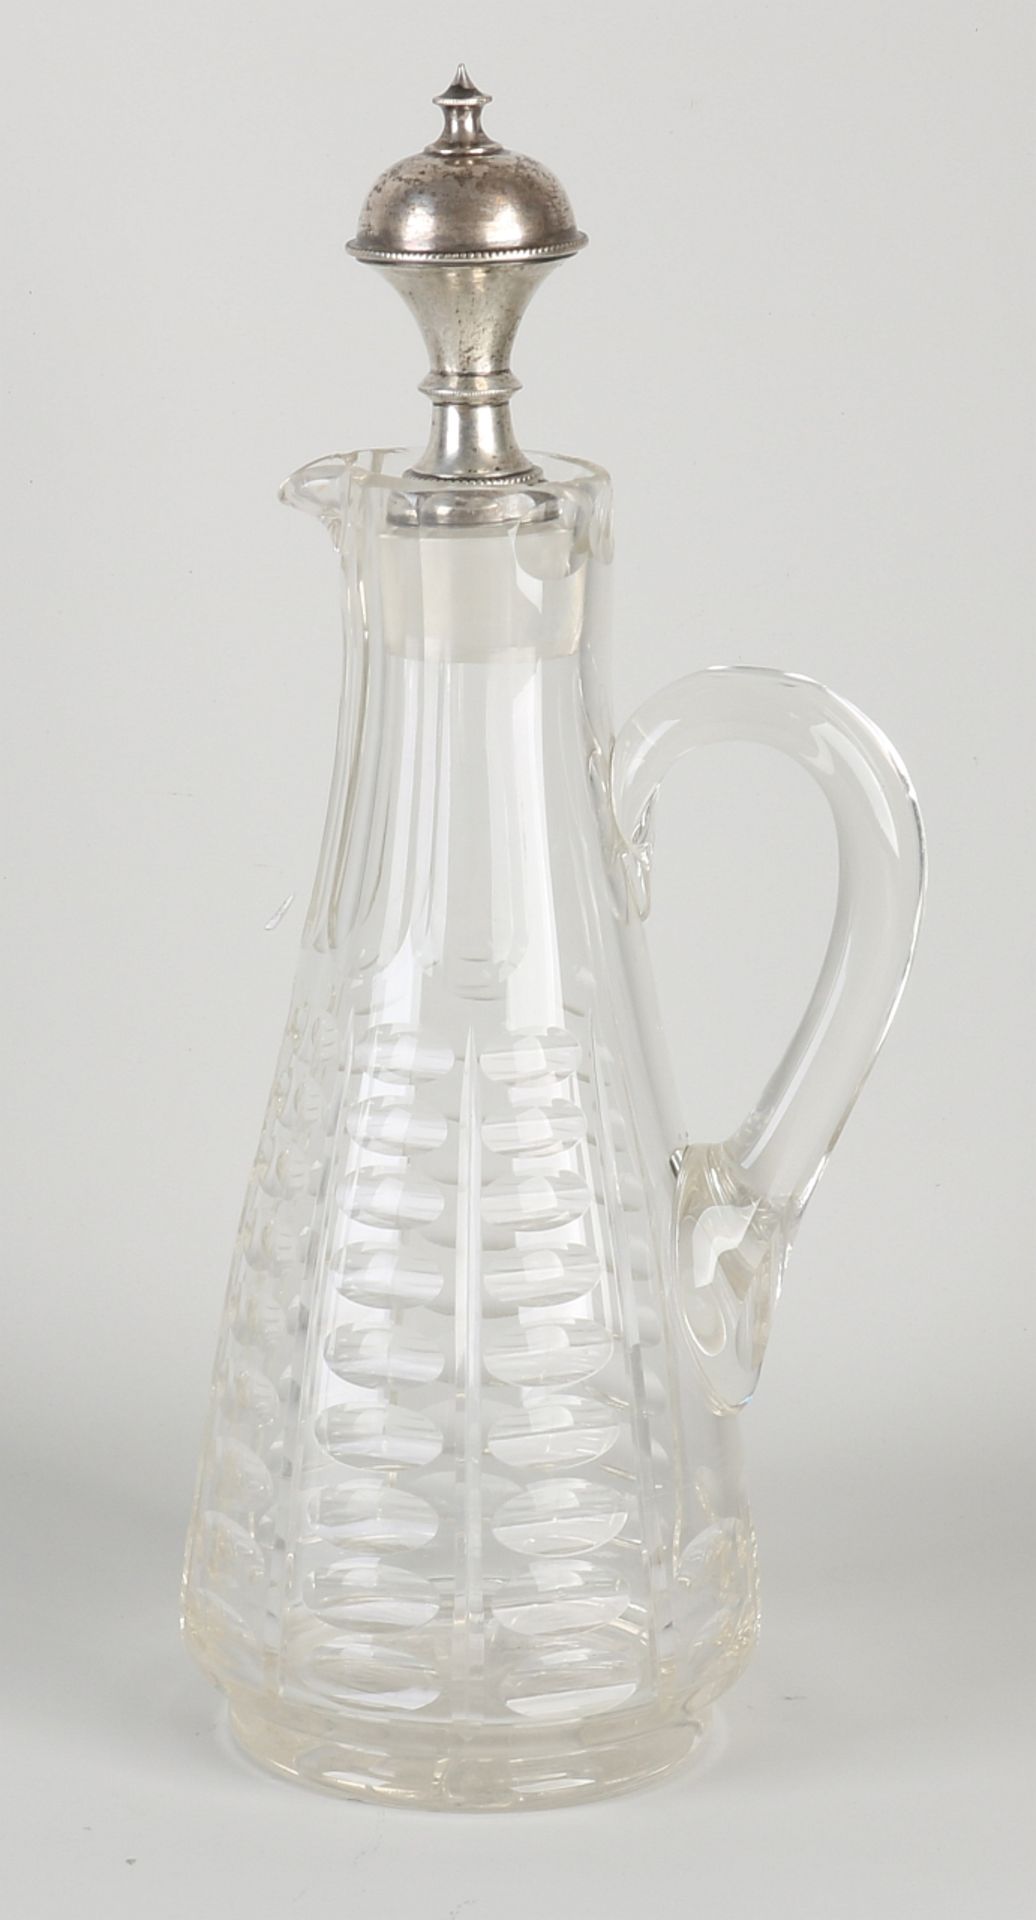 Decanter with silver stopper